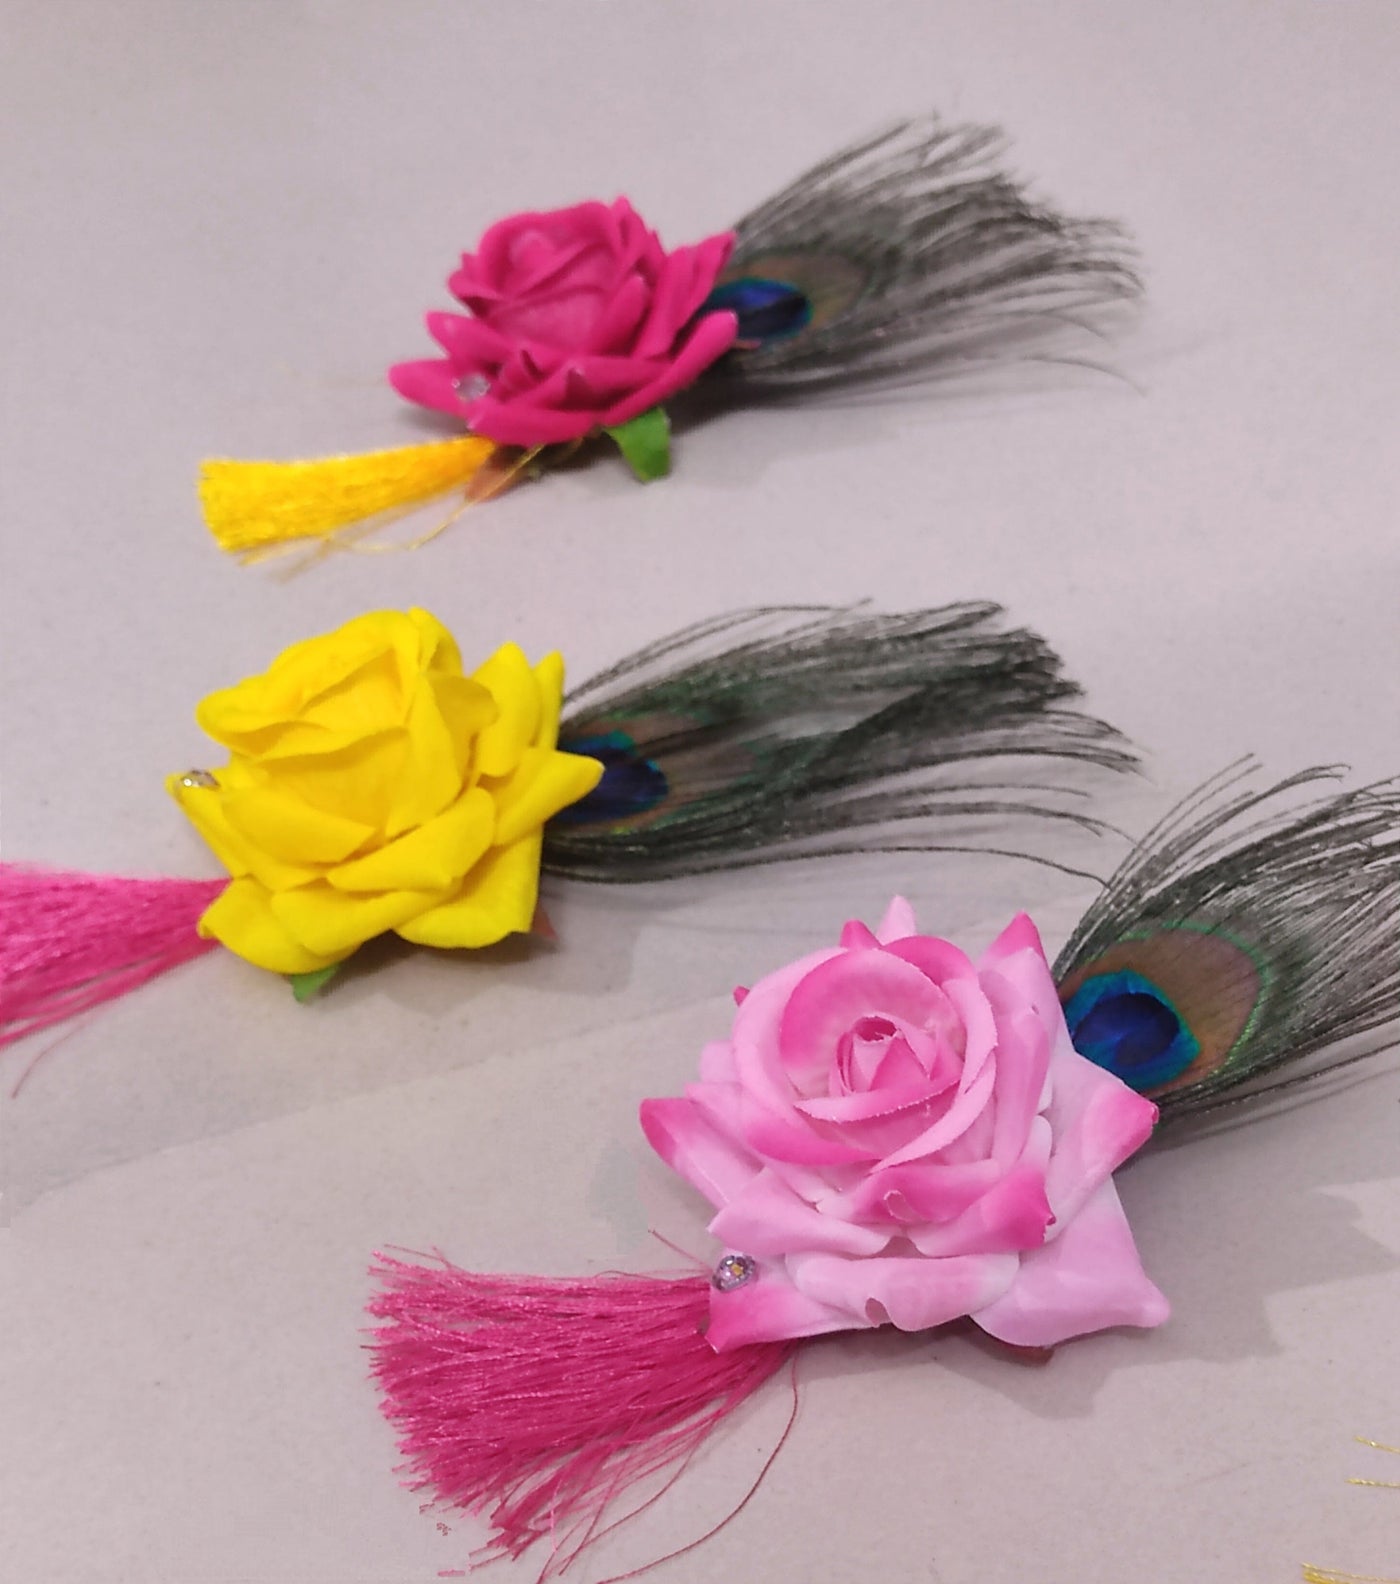 LAMANSH Floral 🌺 brooches LAMANSH® Rose Flower Brooches with Mor pankh & Tassels ( Assorted colors ) Bridesmaid Giveaways Favours ✨ for haldi mehendi sangeet